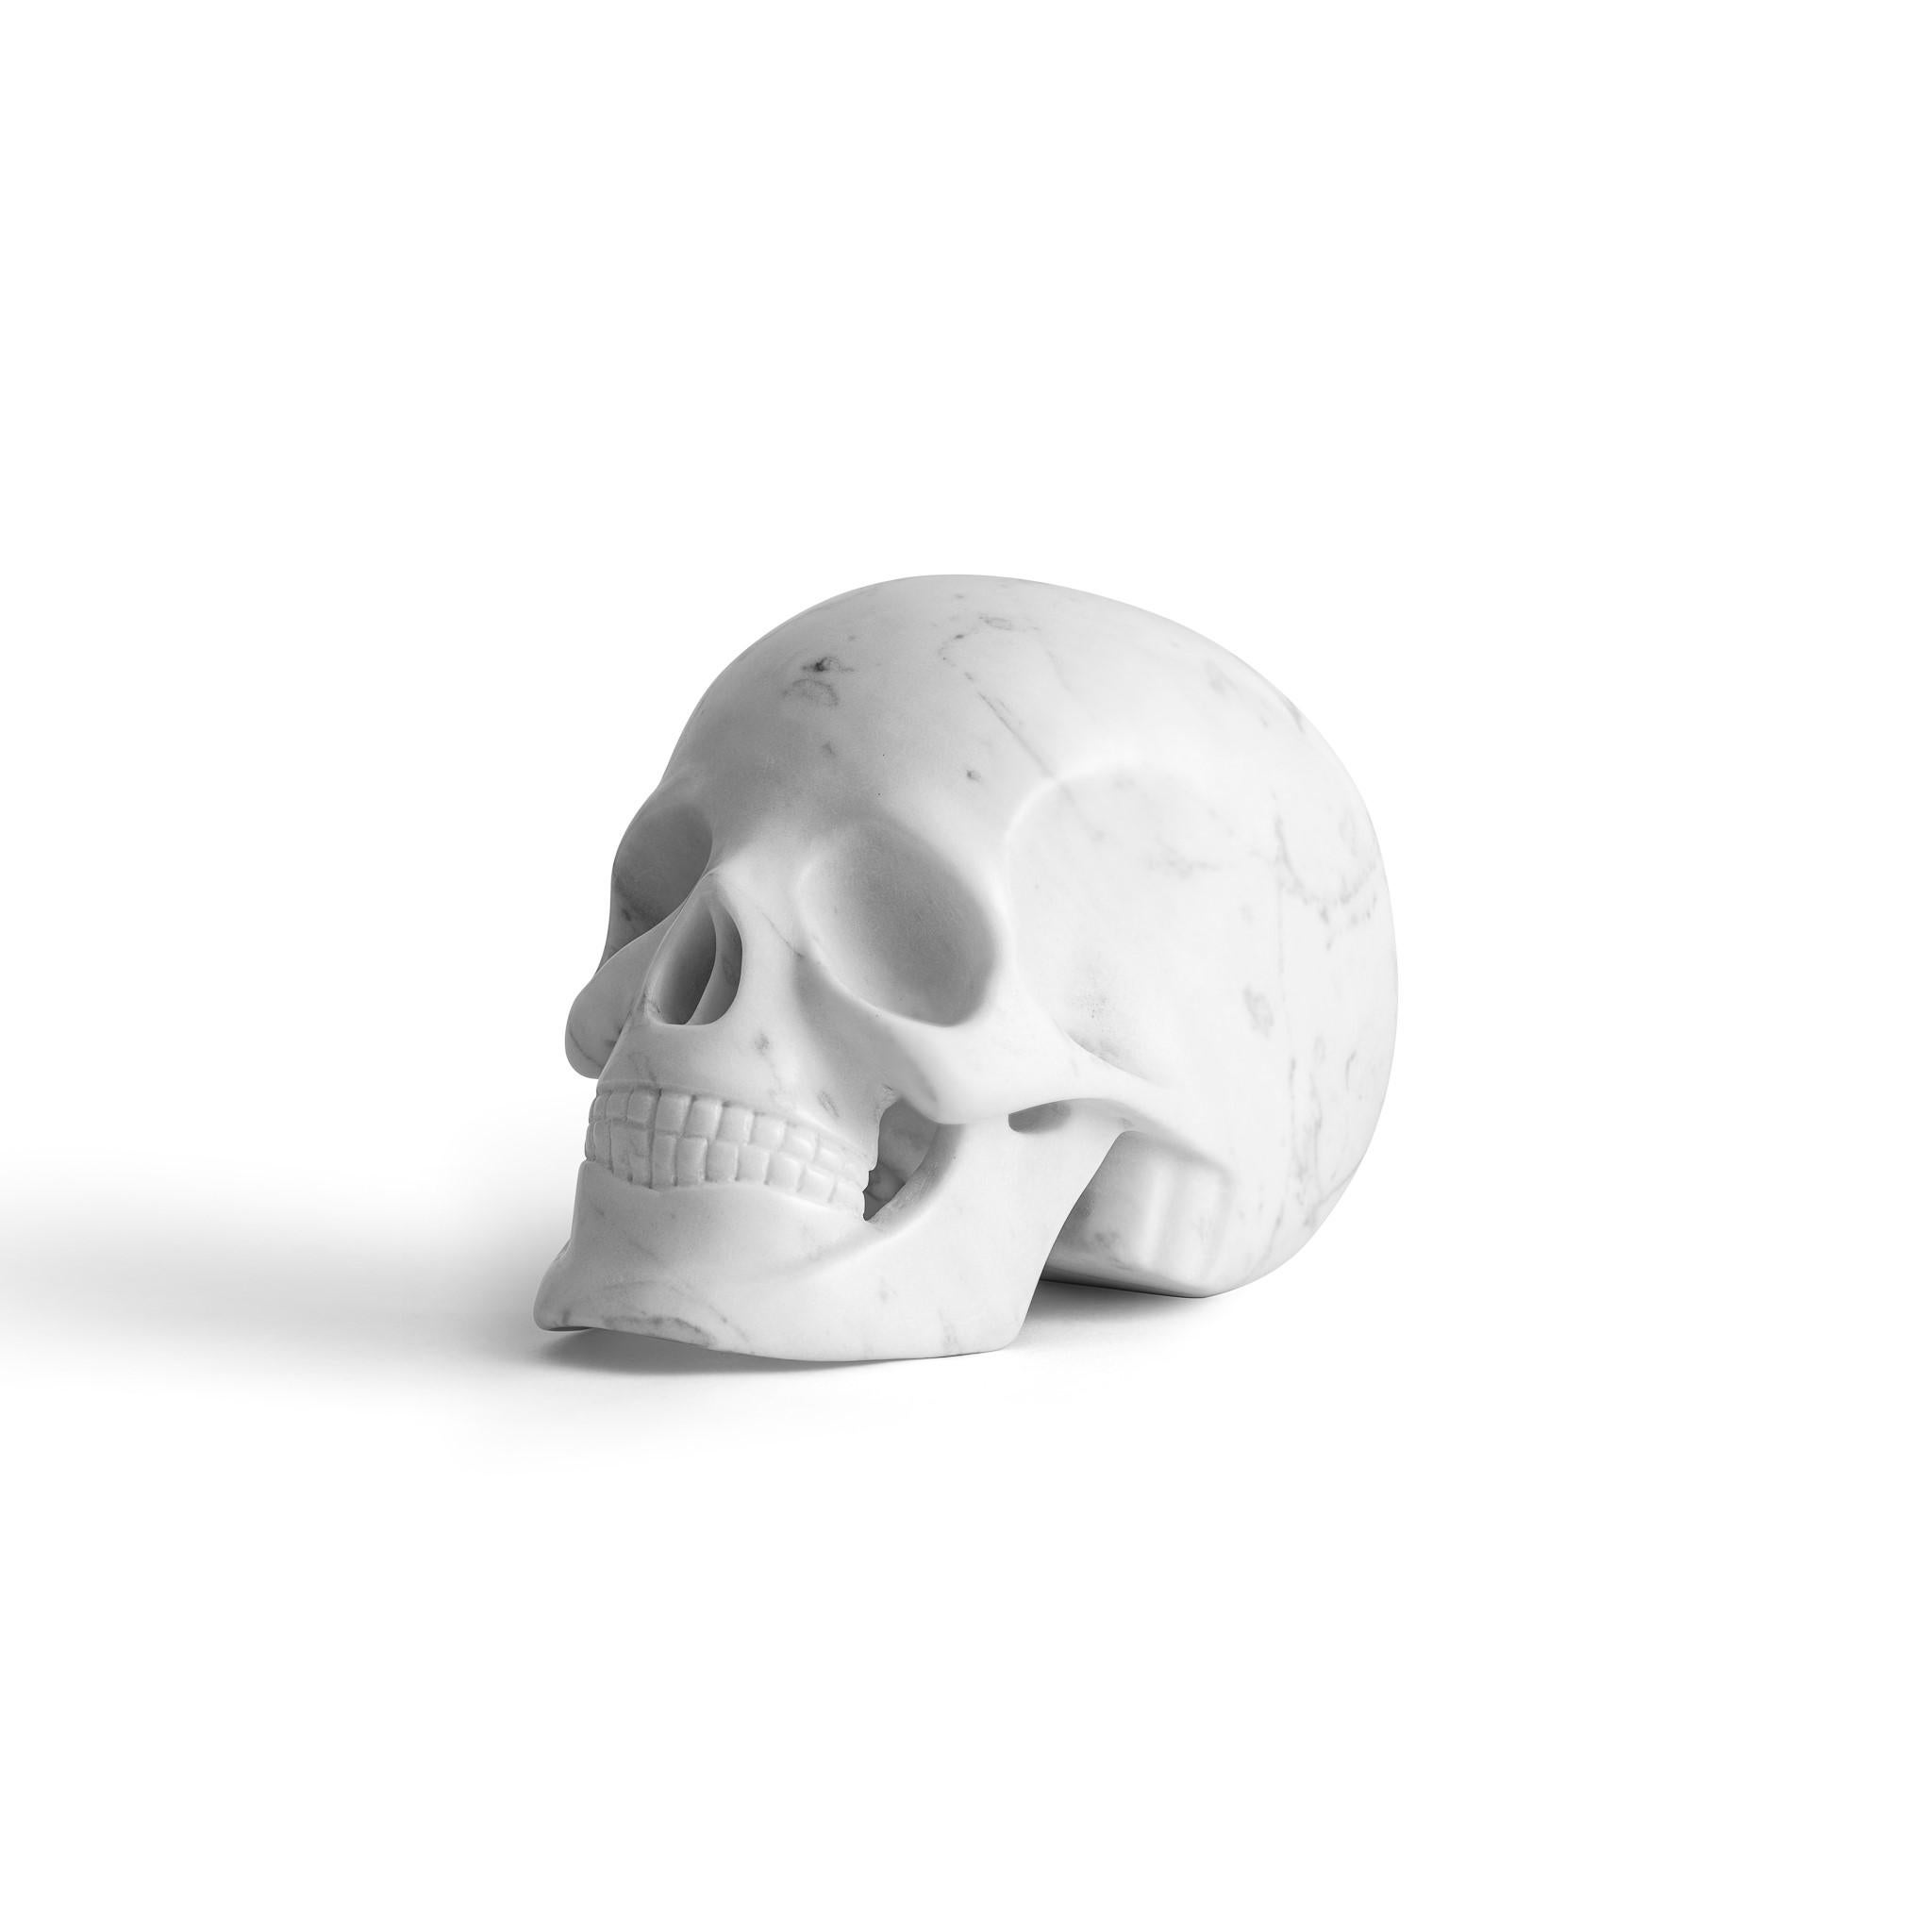 Immerse yourself in the stark elegance of our finely carved Carrara marble skull. Sculpted from the iconic white Carrara marble, renowned for its pure, luminous beauty, this piece encapsulates an alluring interplay between light and shadow, softness